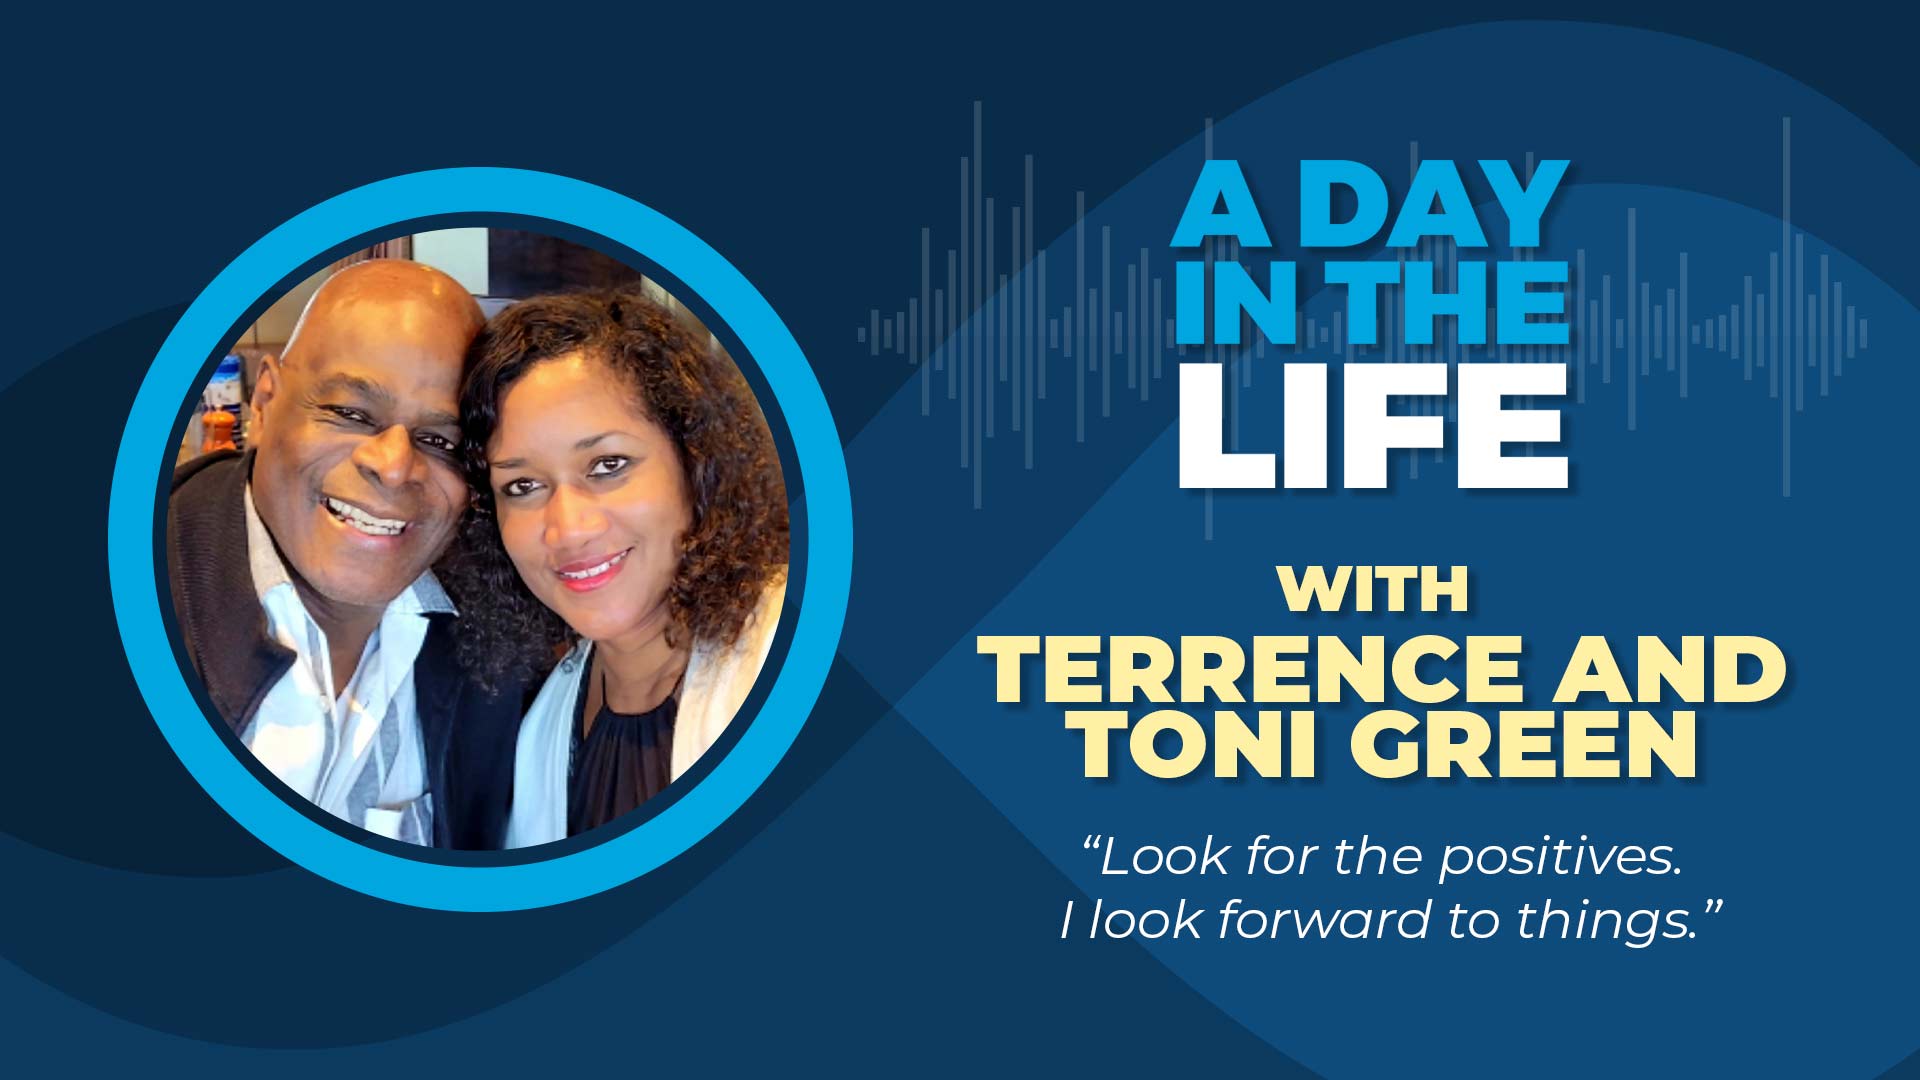 A Day in the Life - Terrence and Toni Green